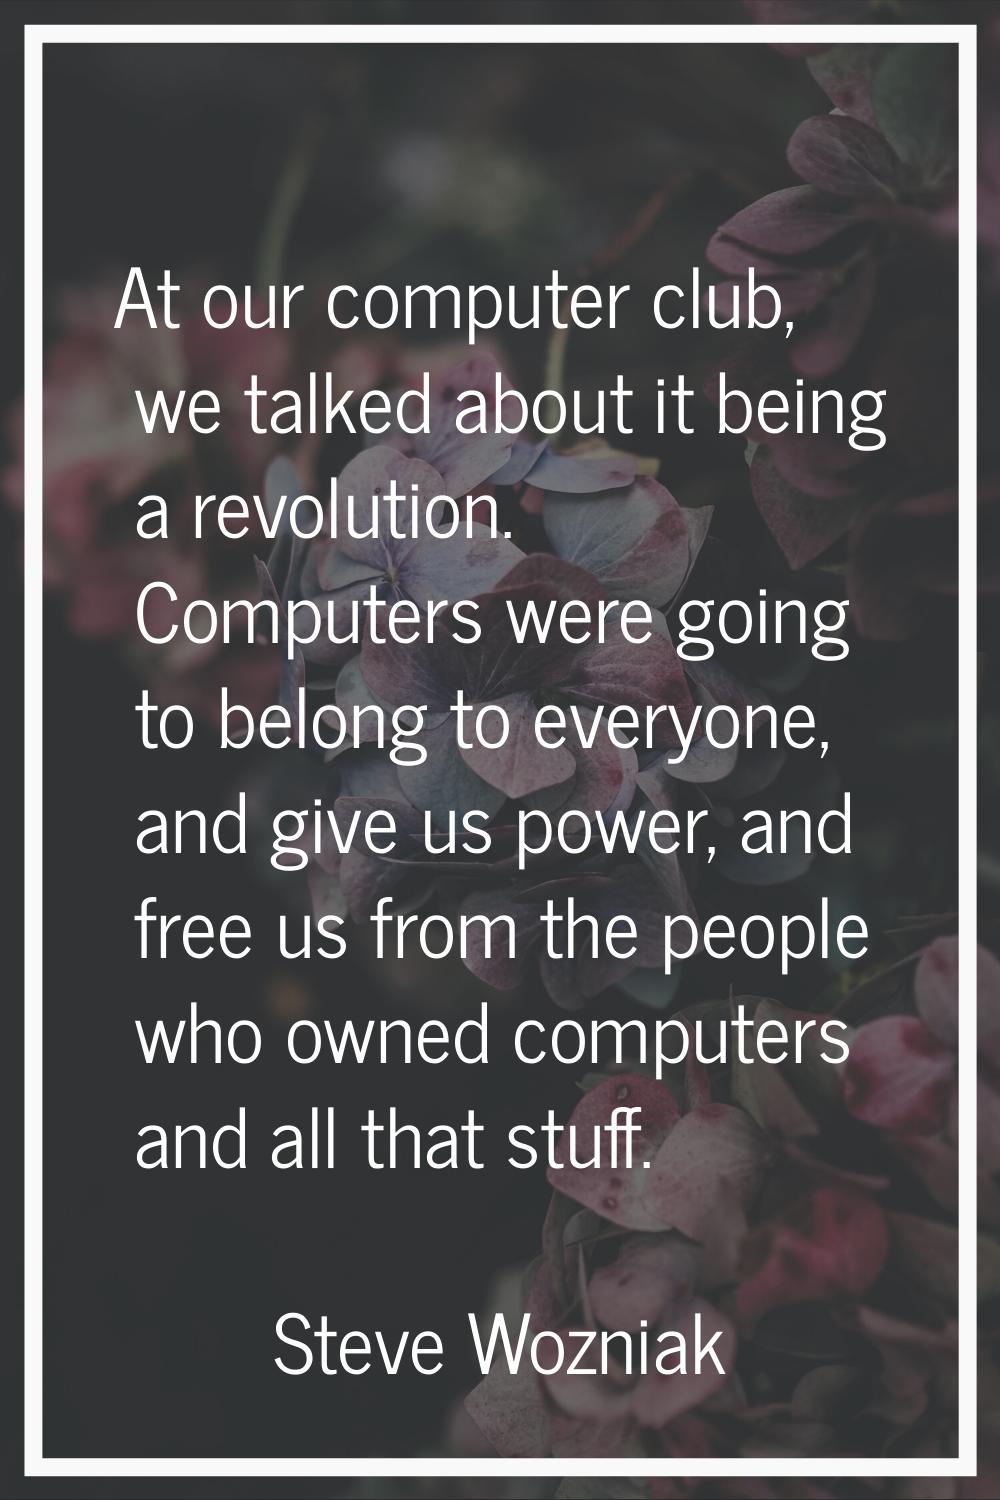 At our computer club, we talked about it being a revolution. Computers were going to belong to ever